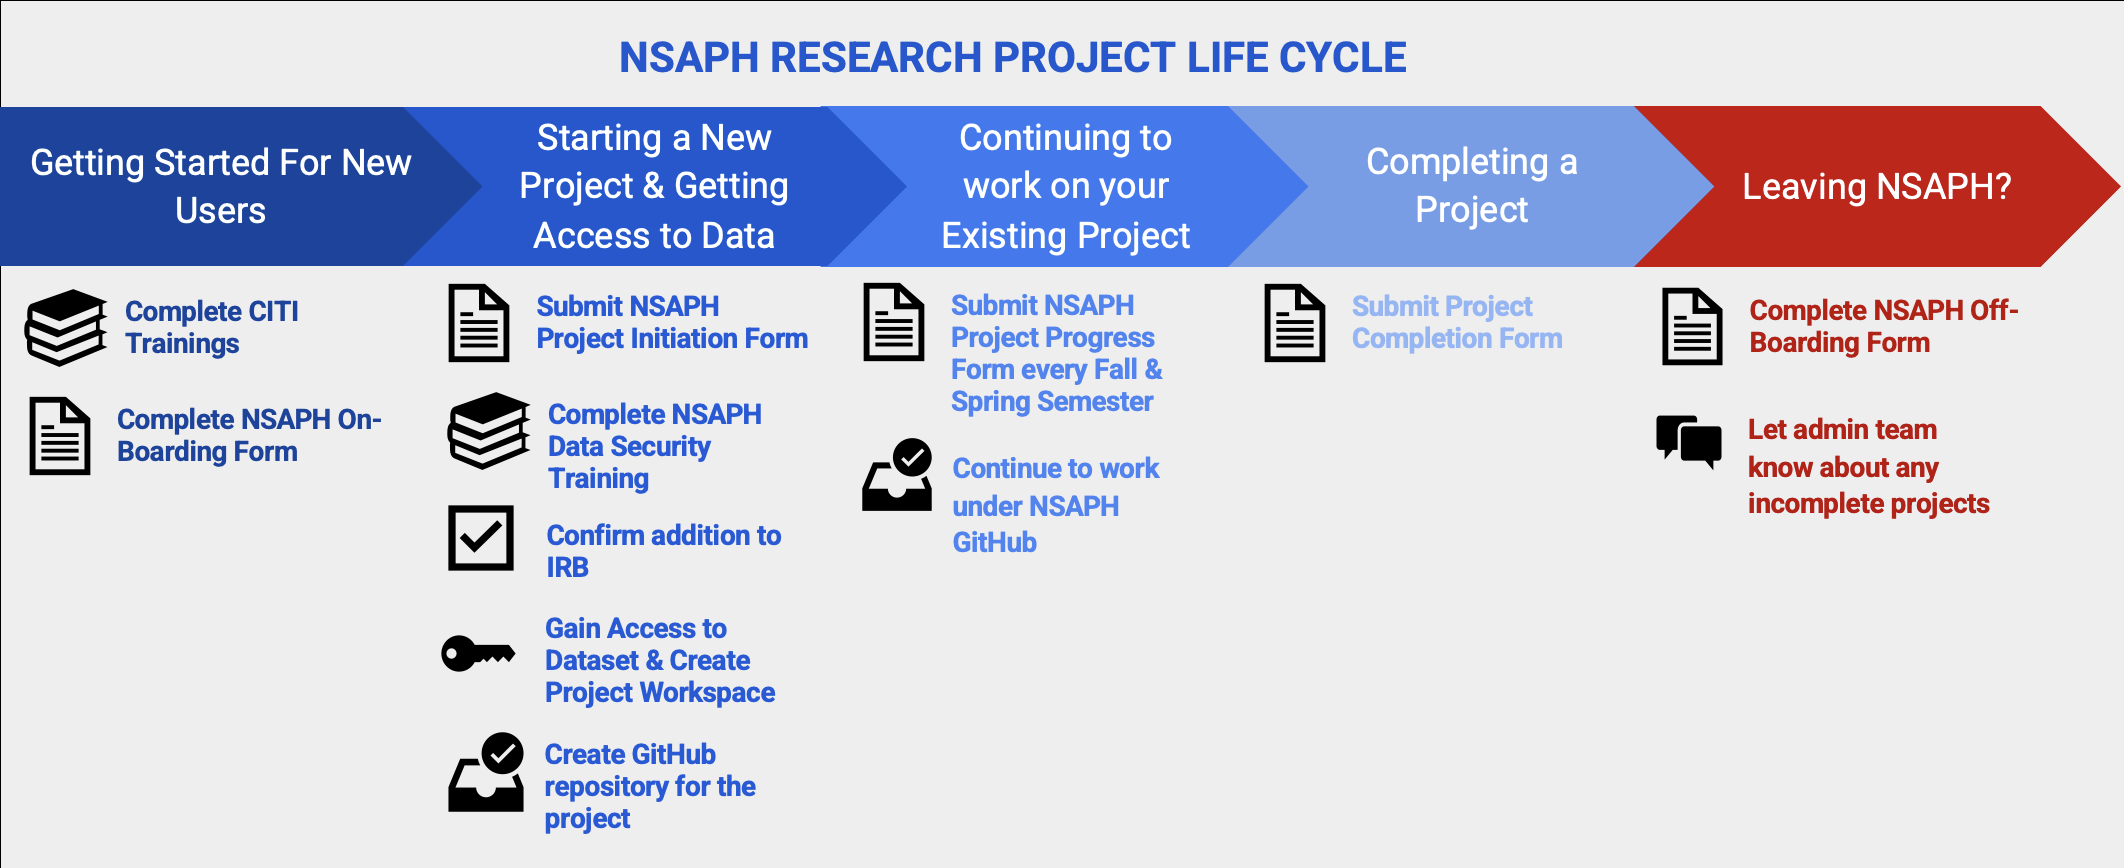 _images/NSAPH-Research-Lifecycle_LK.png